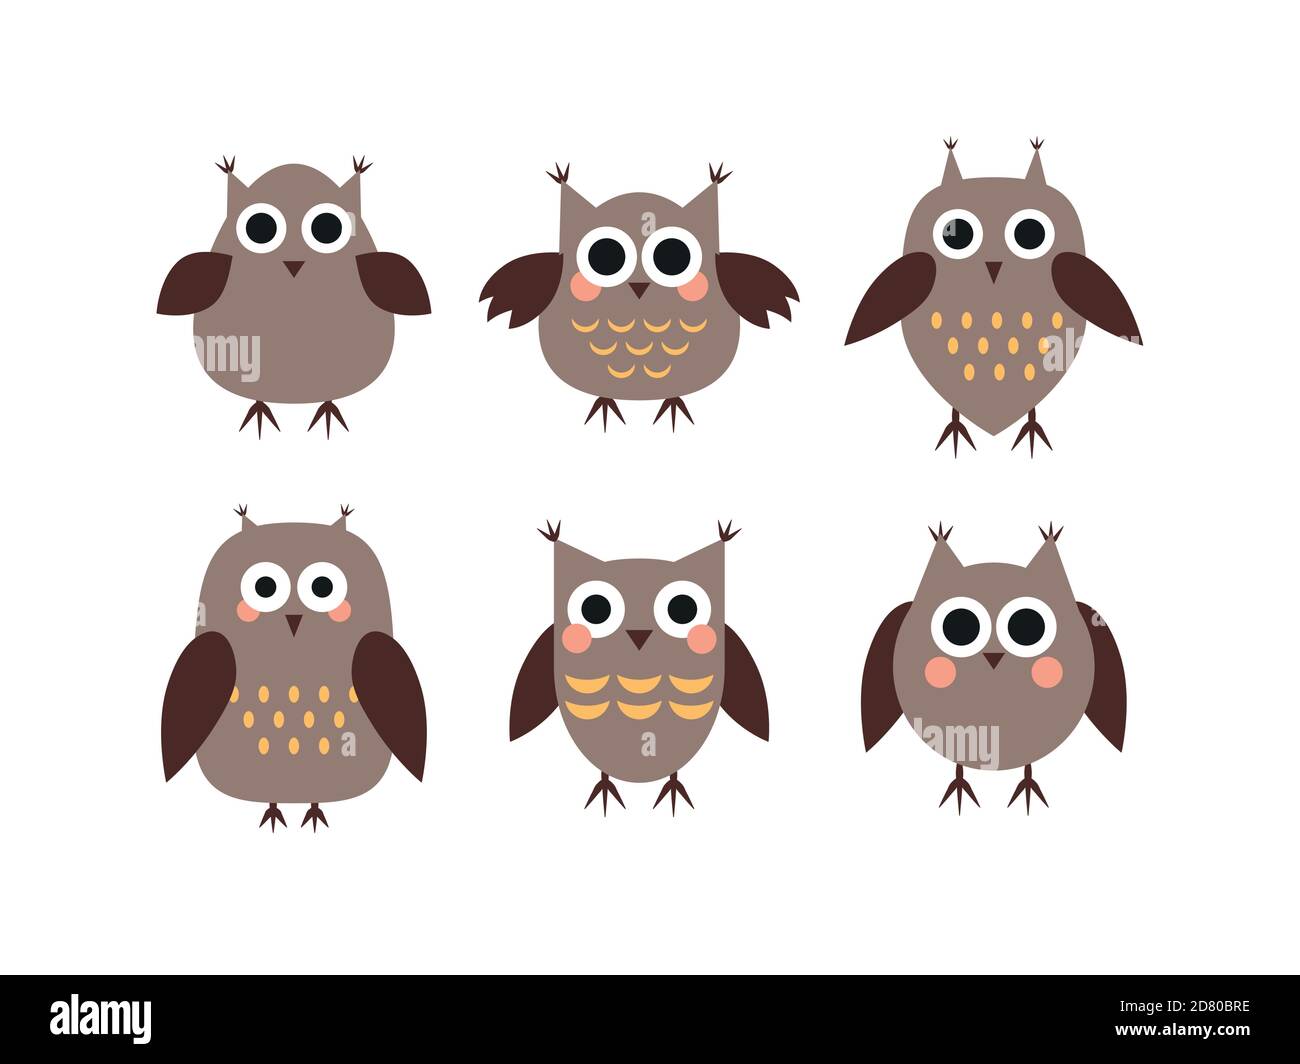 Set of vector illustration of brown cartoon happy owls on white background. Funny and cute birds set in flat style. Stock Vector